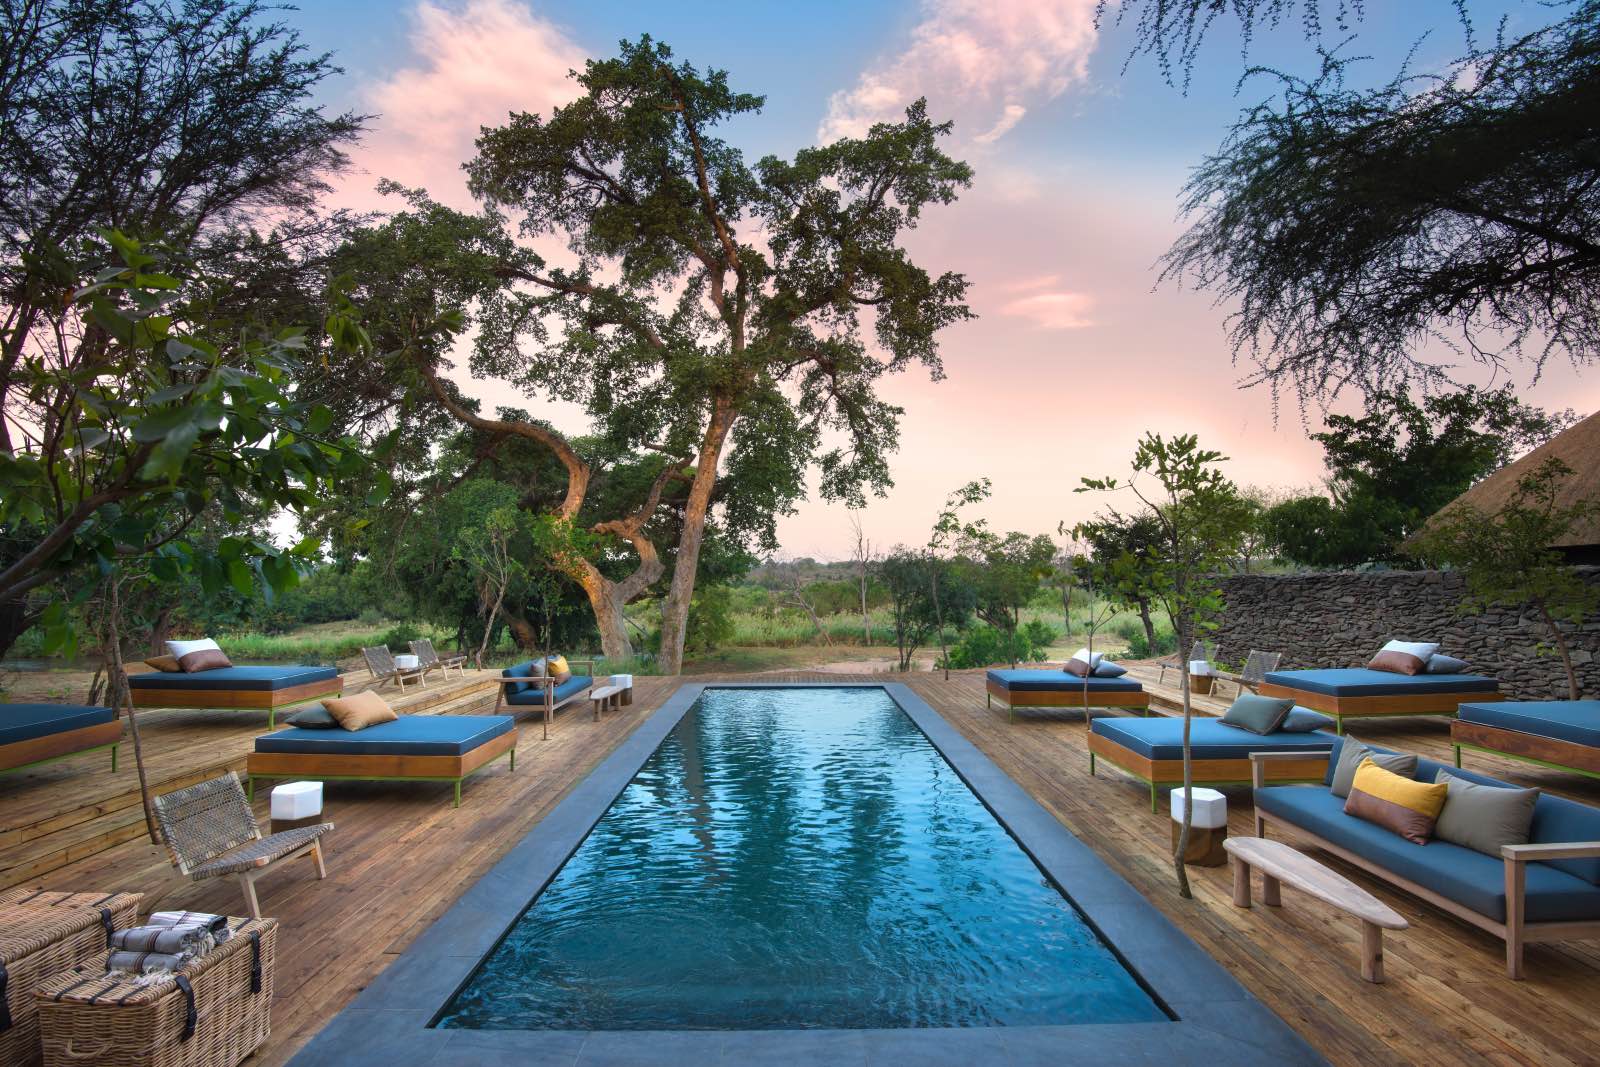 The refreshing swimming pool and stylish lounging deck surrounded by trees at Lion Sands River Lodge